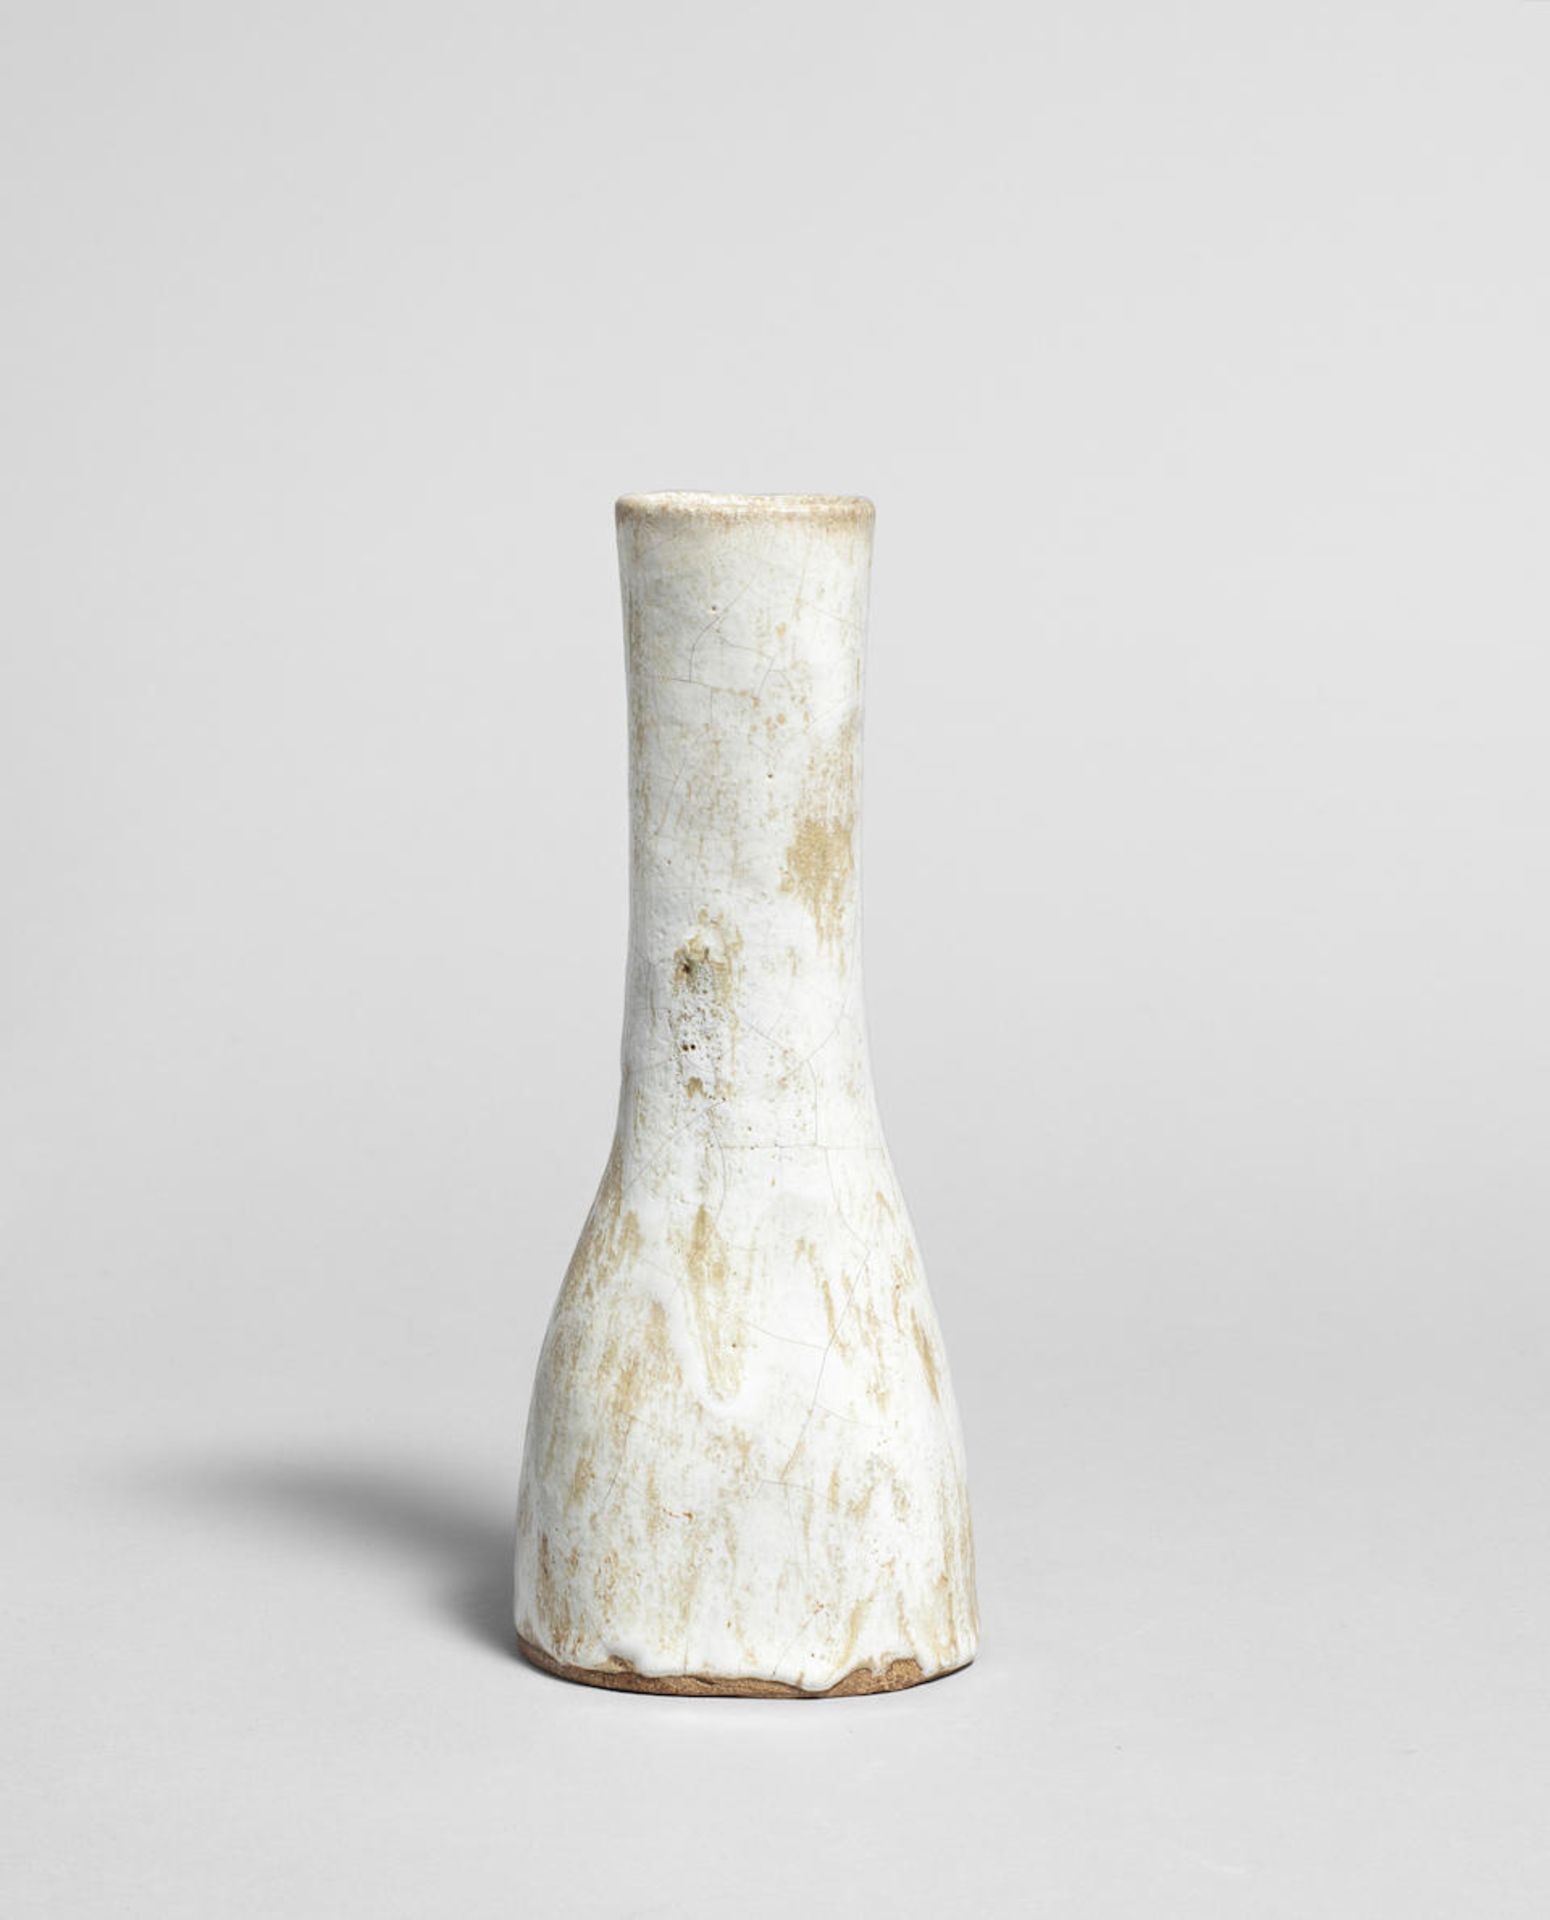 Lucie Rie Tall vase, circa 1978 - Image 2 of 3